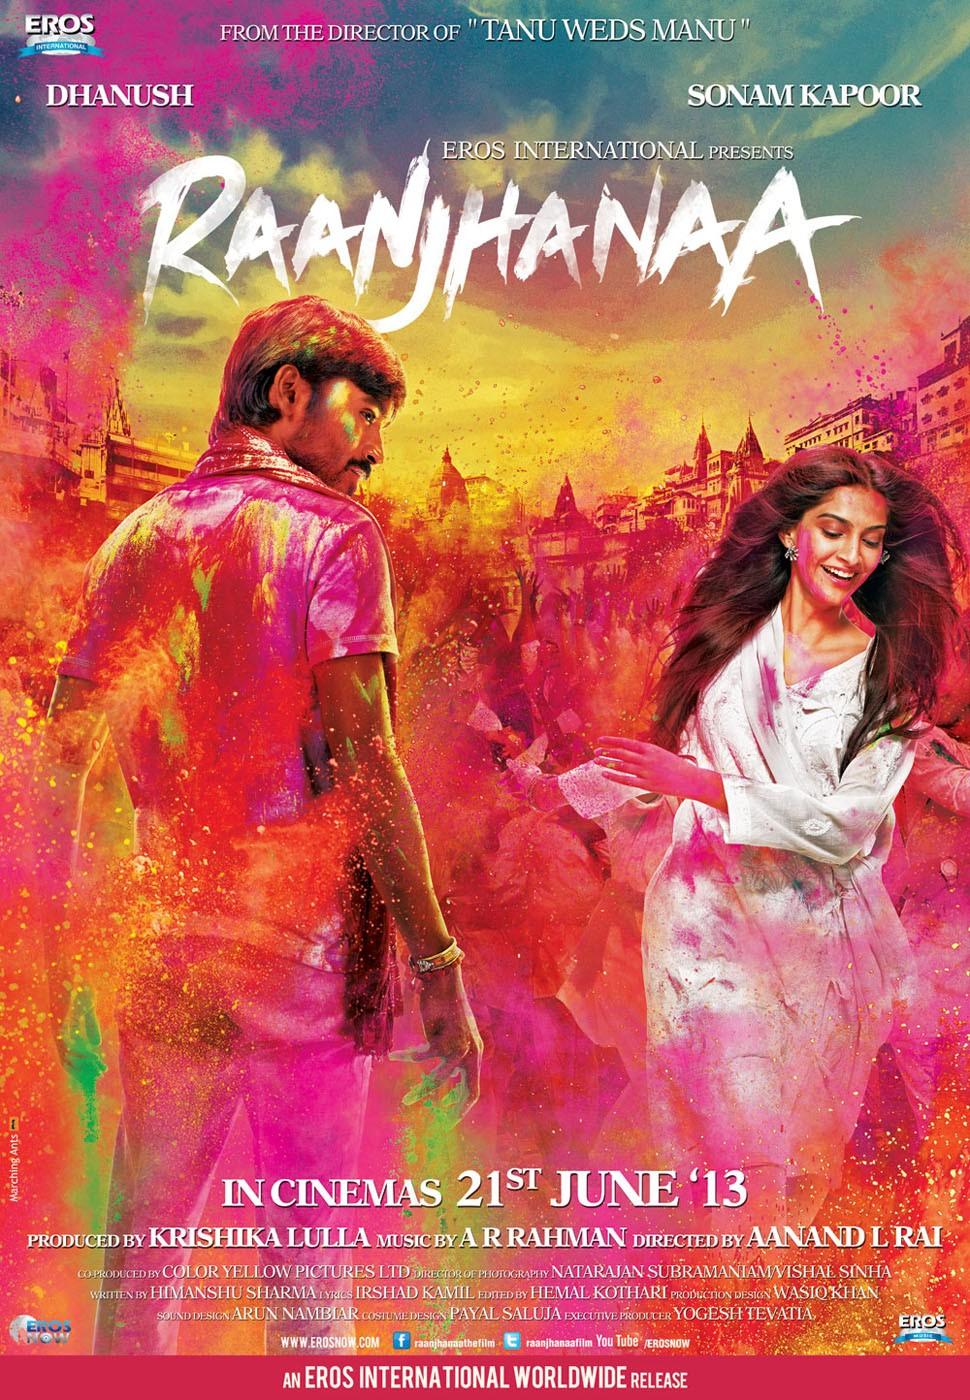 As the film unfolds, it eloquently portrays the beauty and struggles of cross-cultural love, highlighting the power of genuine affection and the strength of love that knows no boundaries. Dhanush's stellar performance as Kundan and the chemistry between the lead pair breathe life into their unique and captivating relationship.